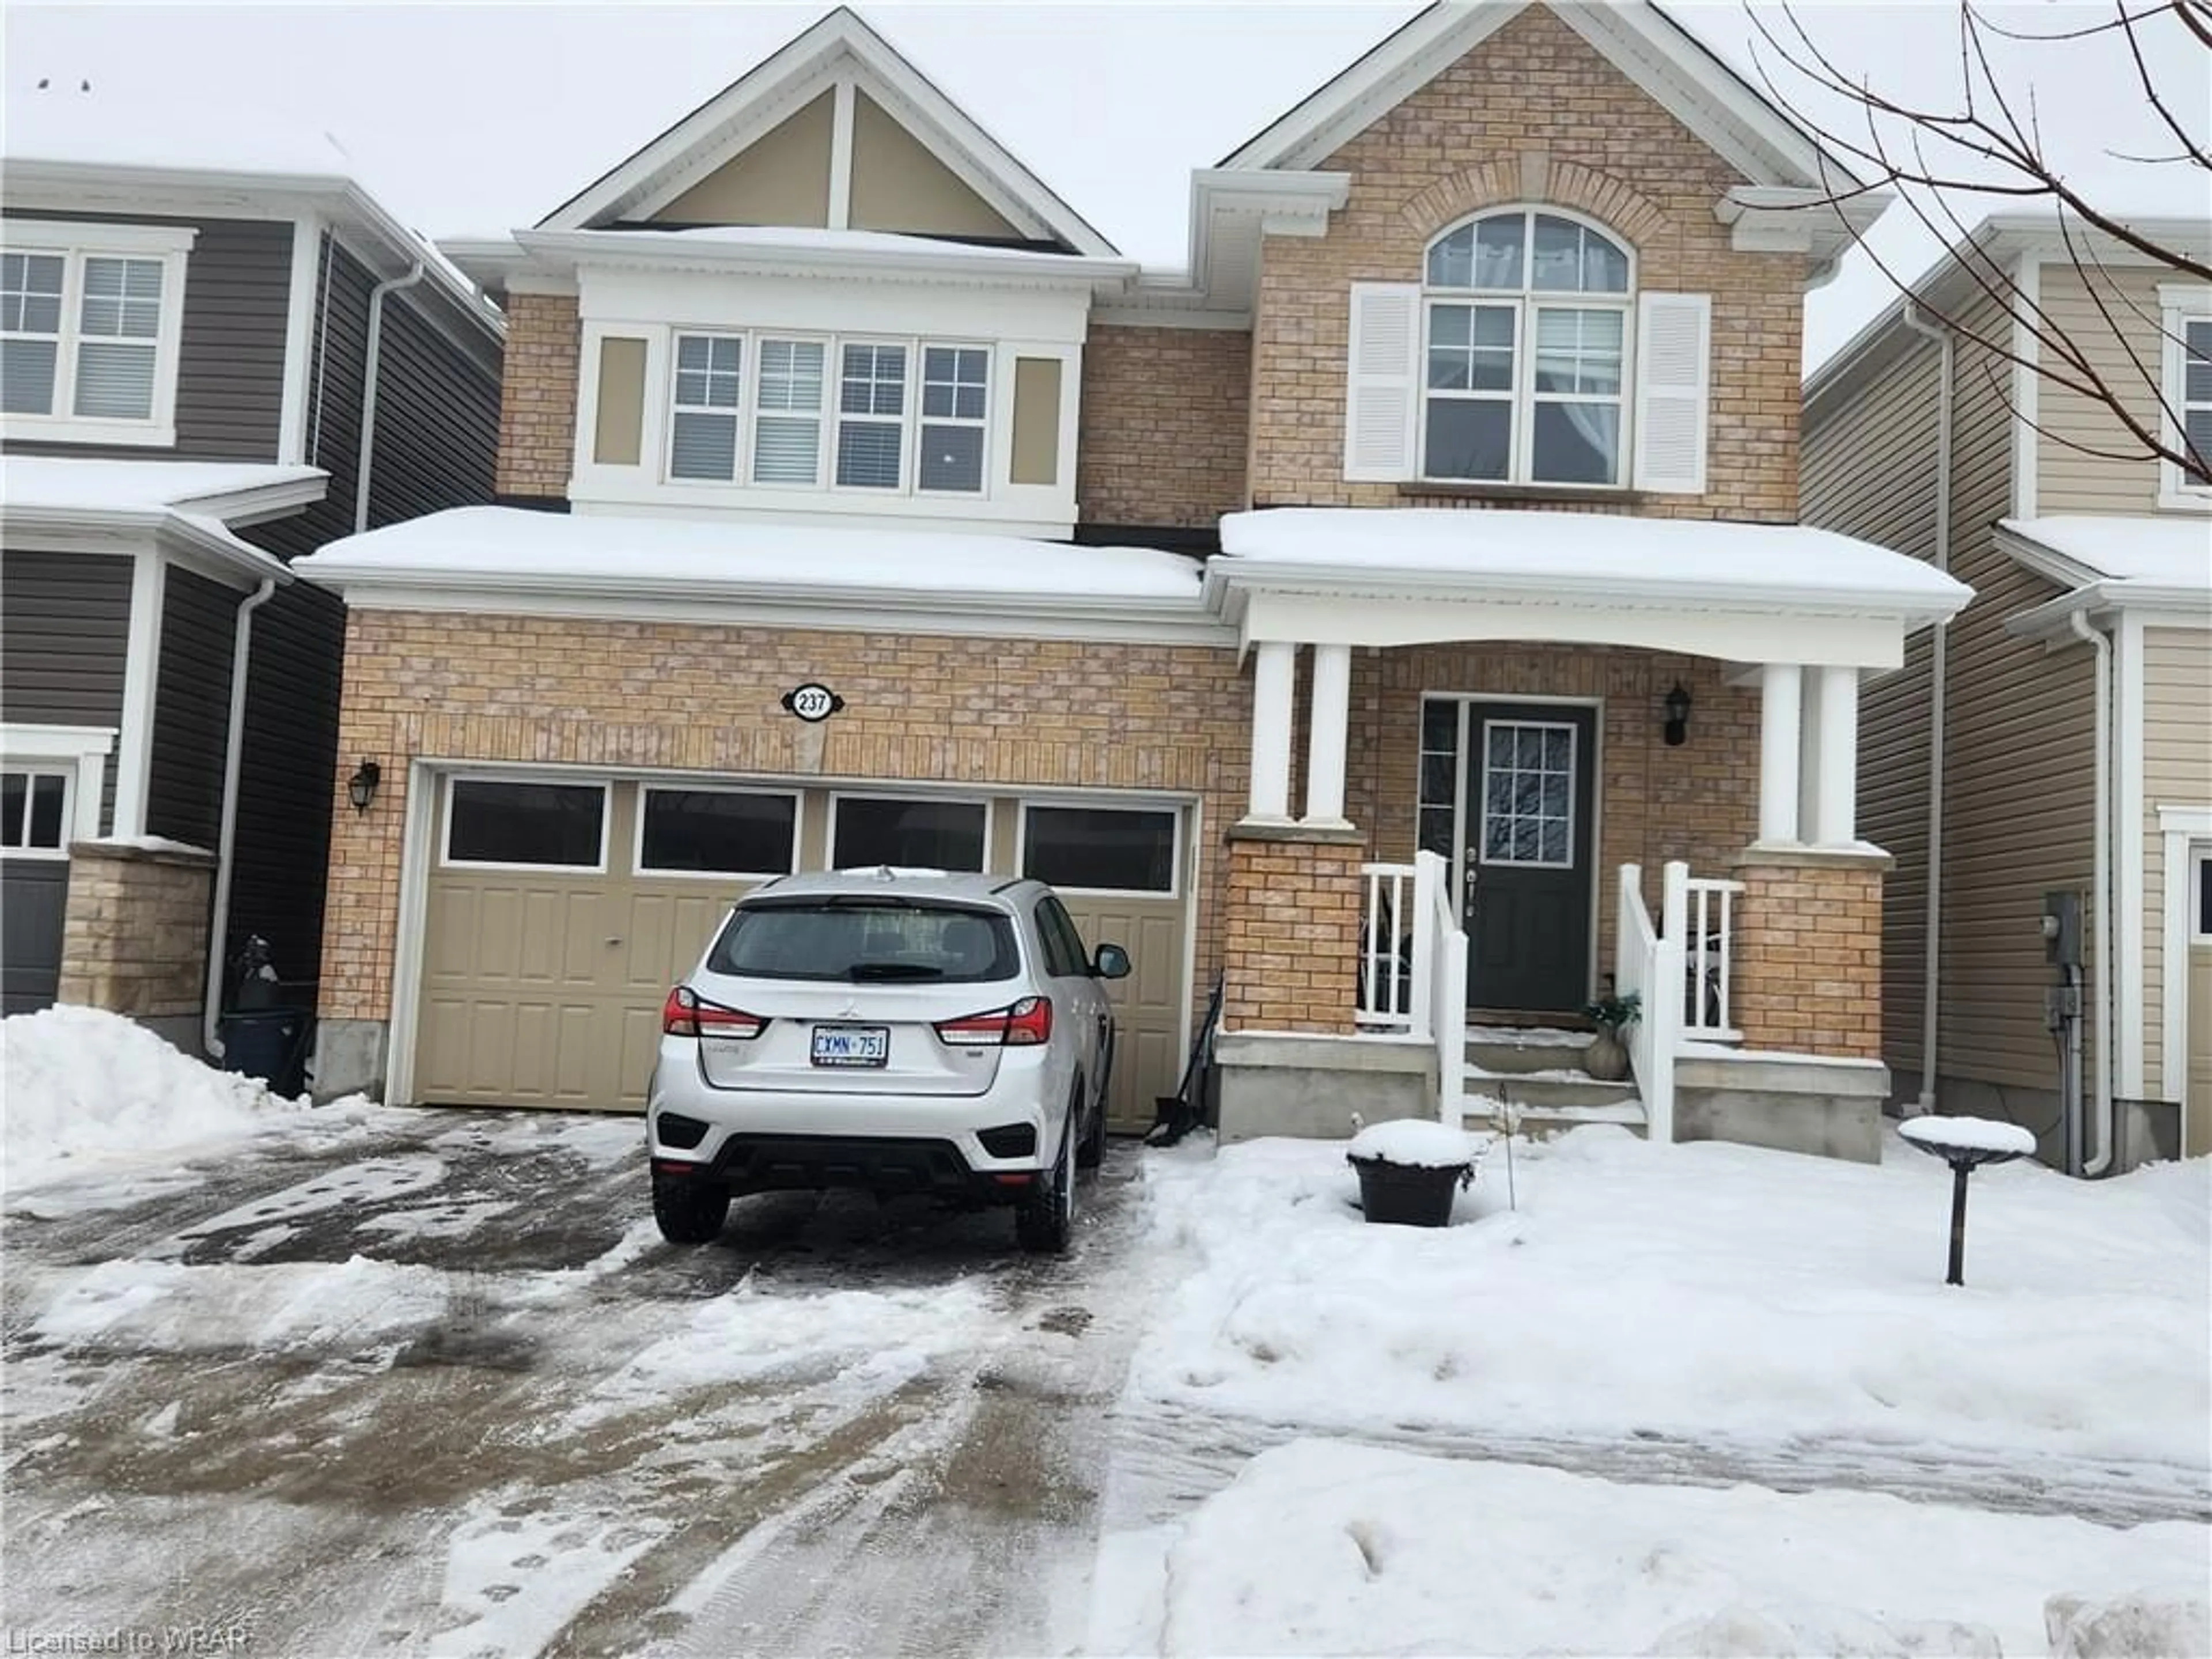 Outside view for 237 Shady Glen Cres, Kitchener Ontario N2R 0J9